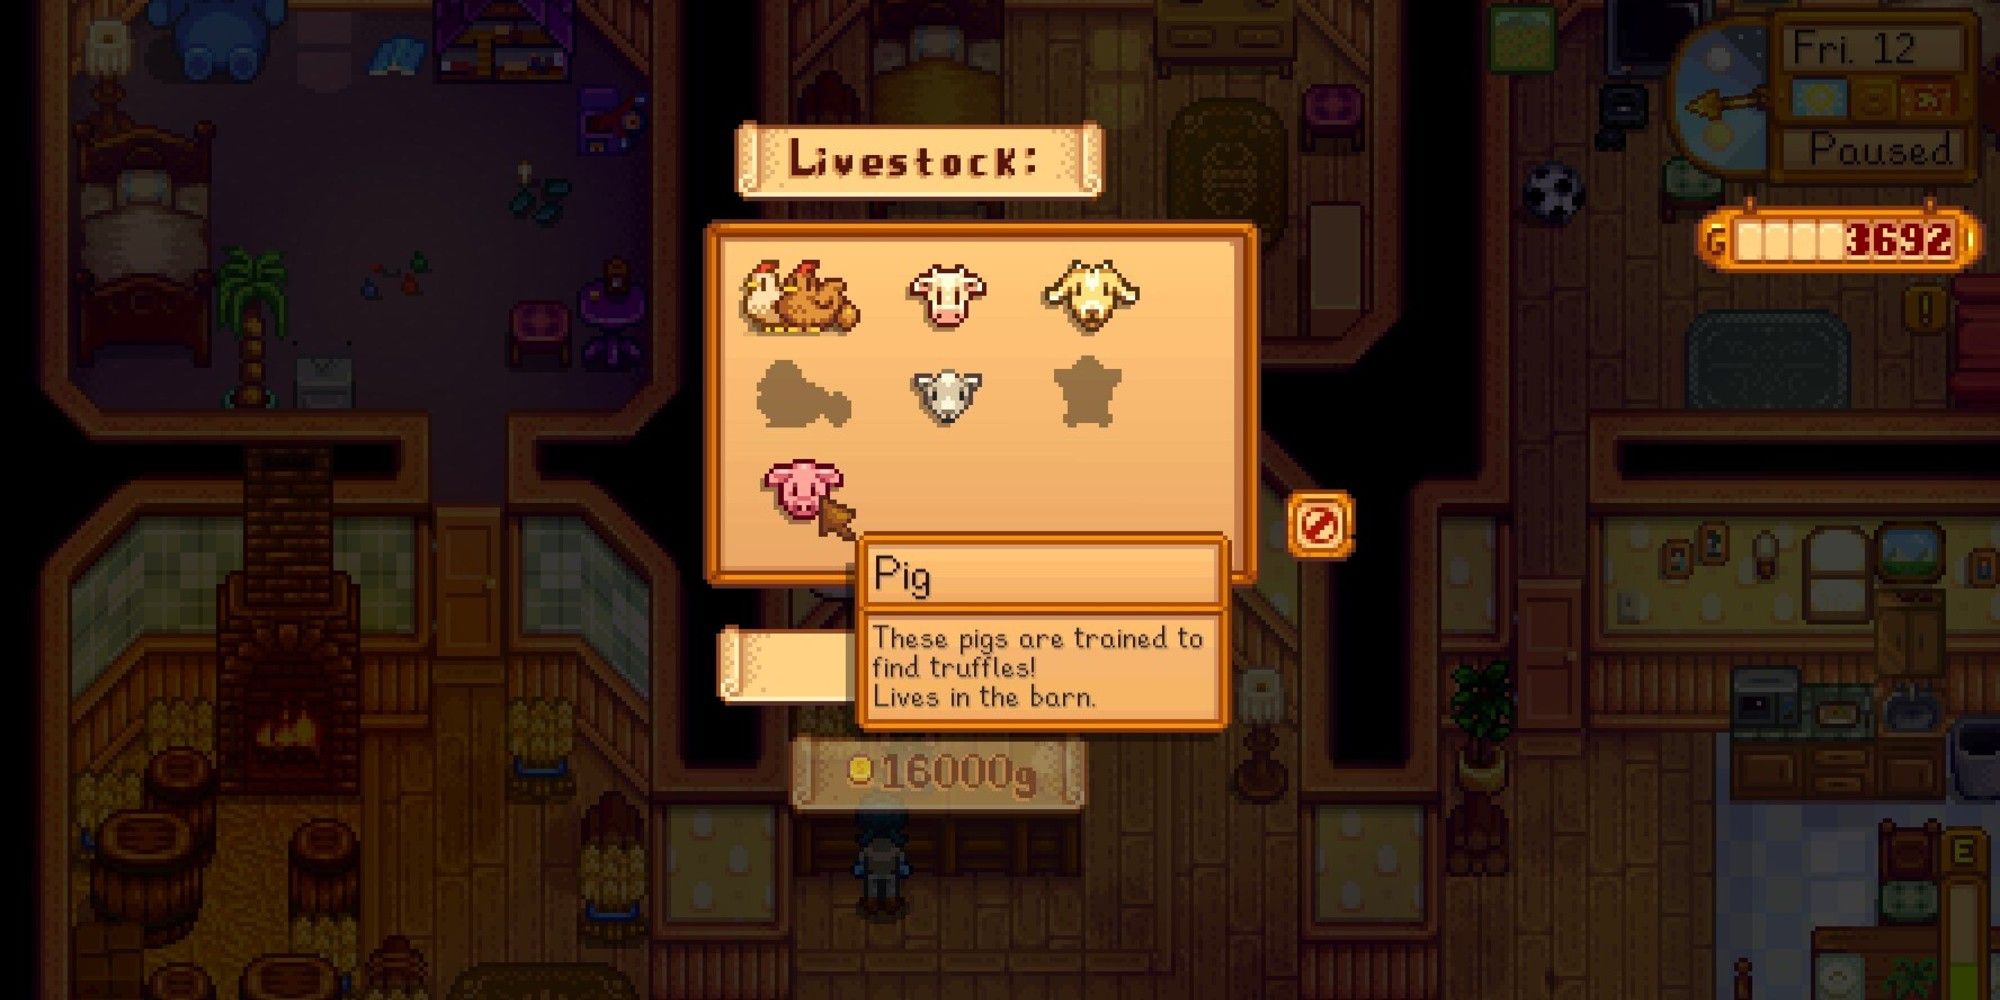 player interacting with livestock purchasing page, with pig highlighted